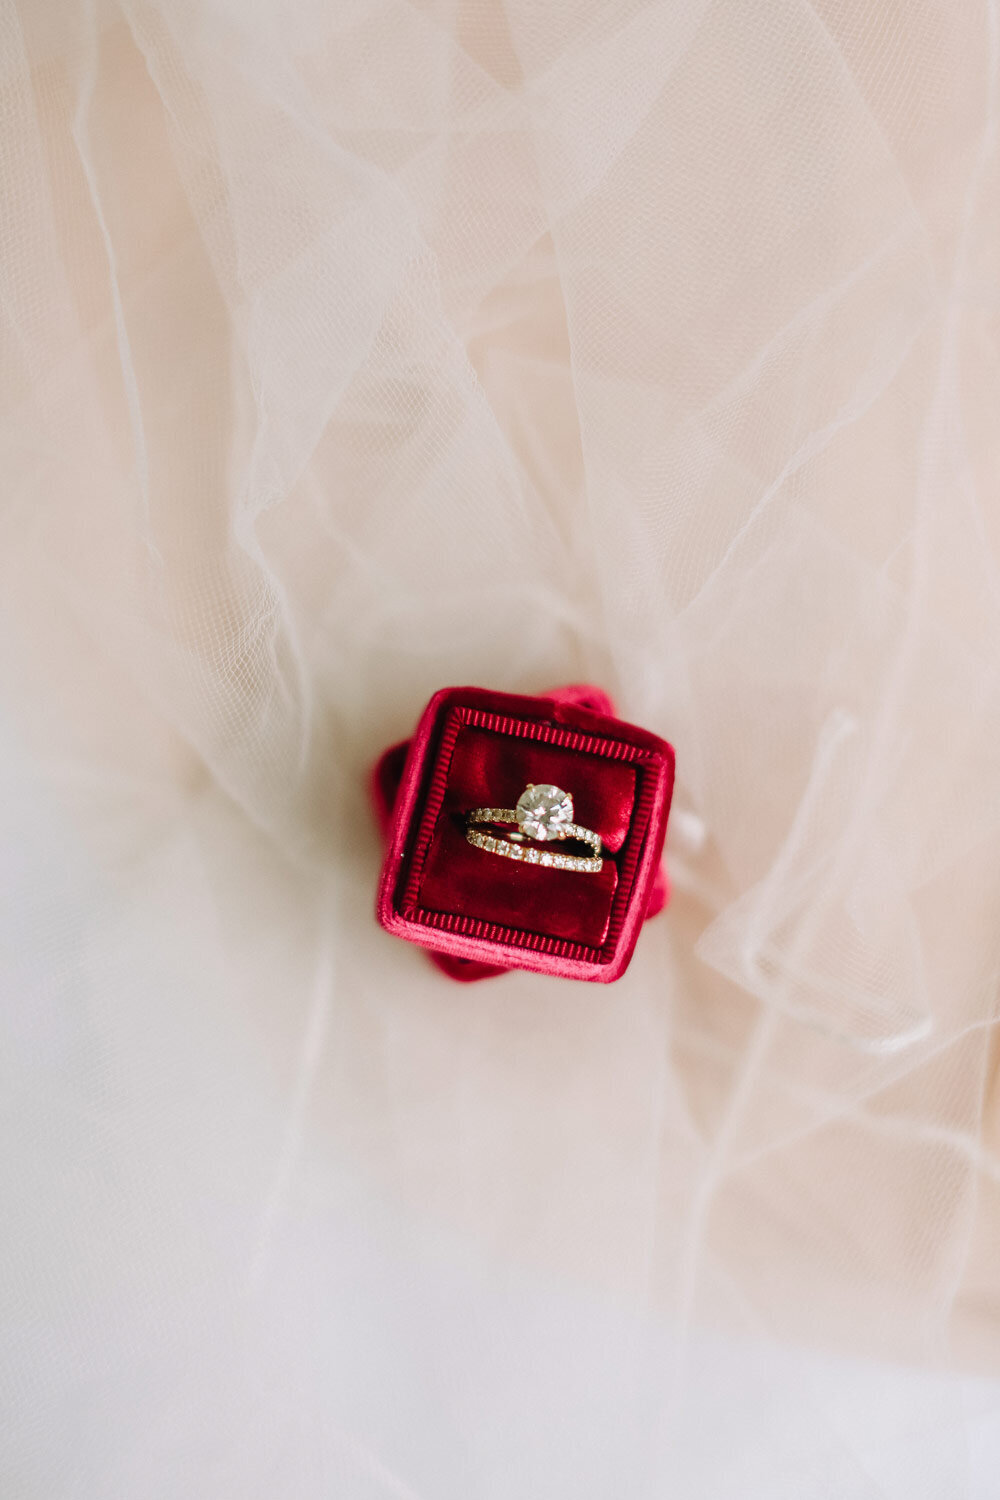 Bride's ring details in a magenta box